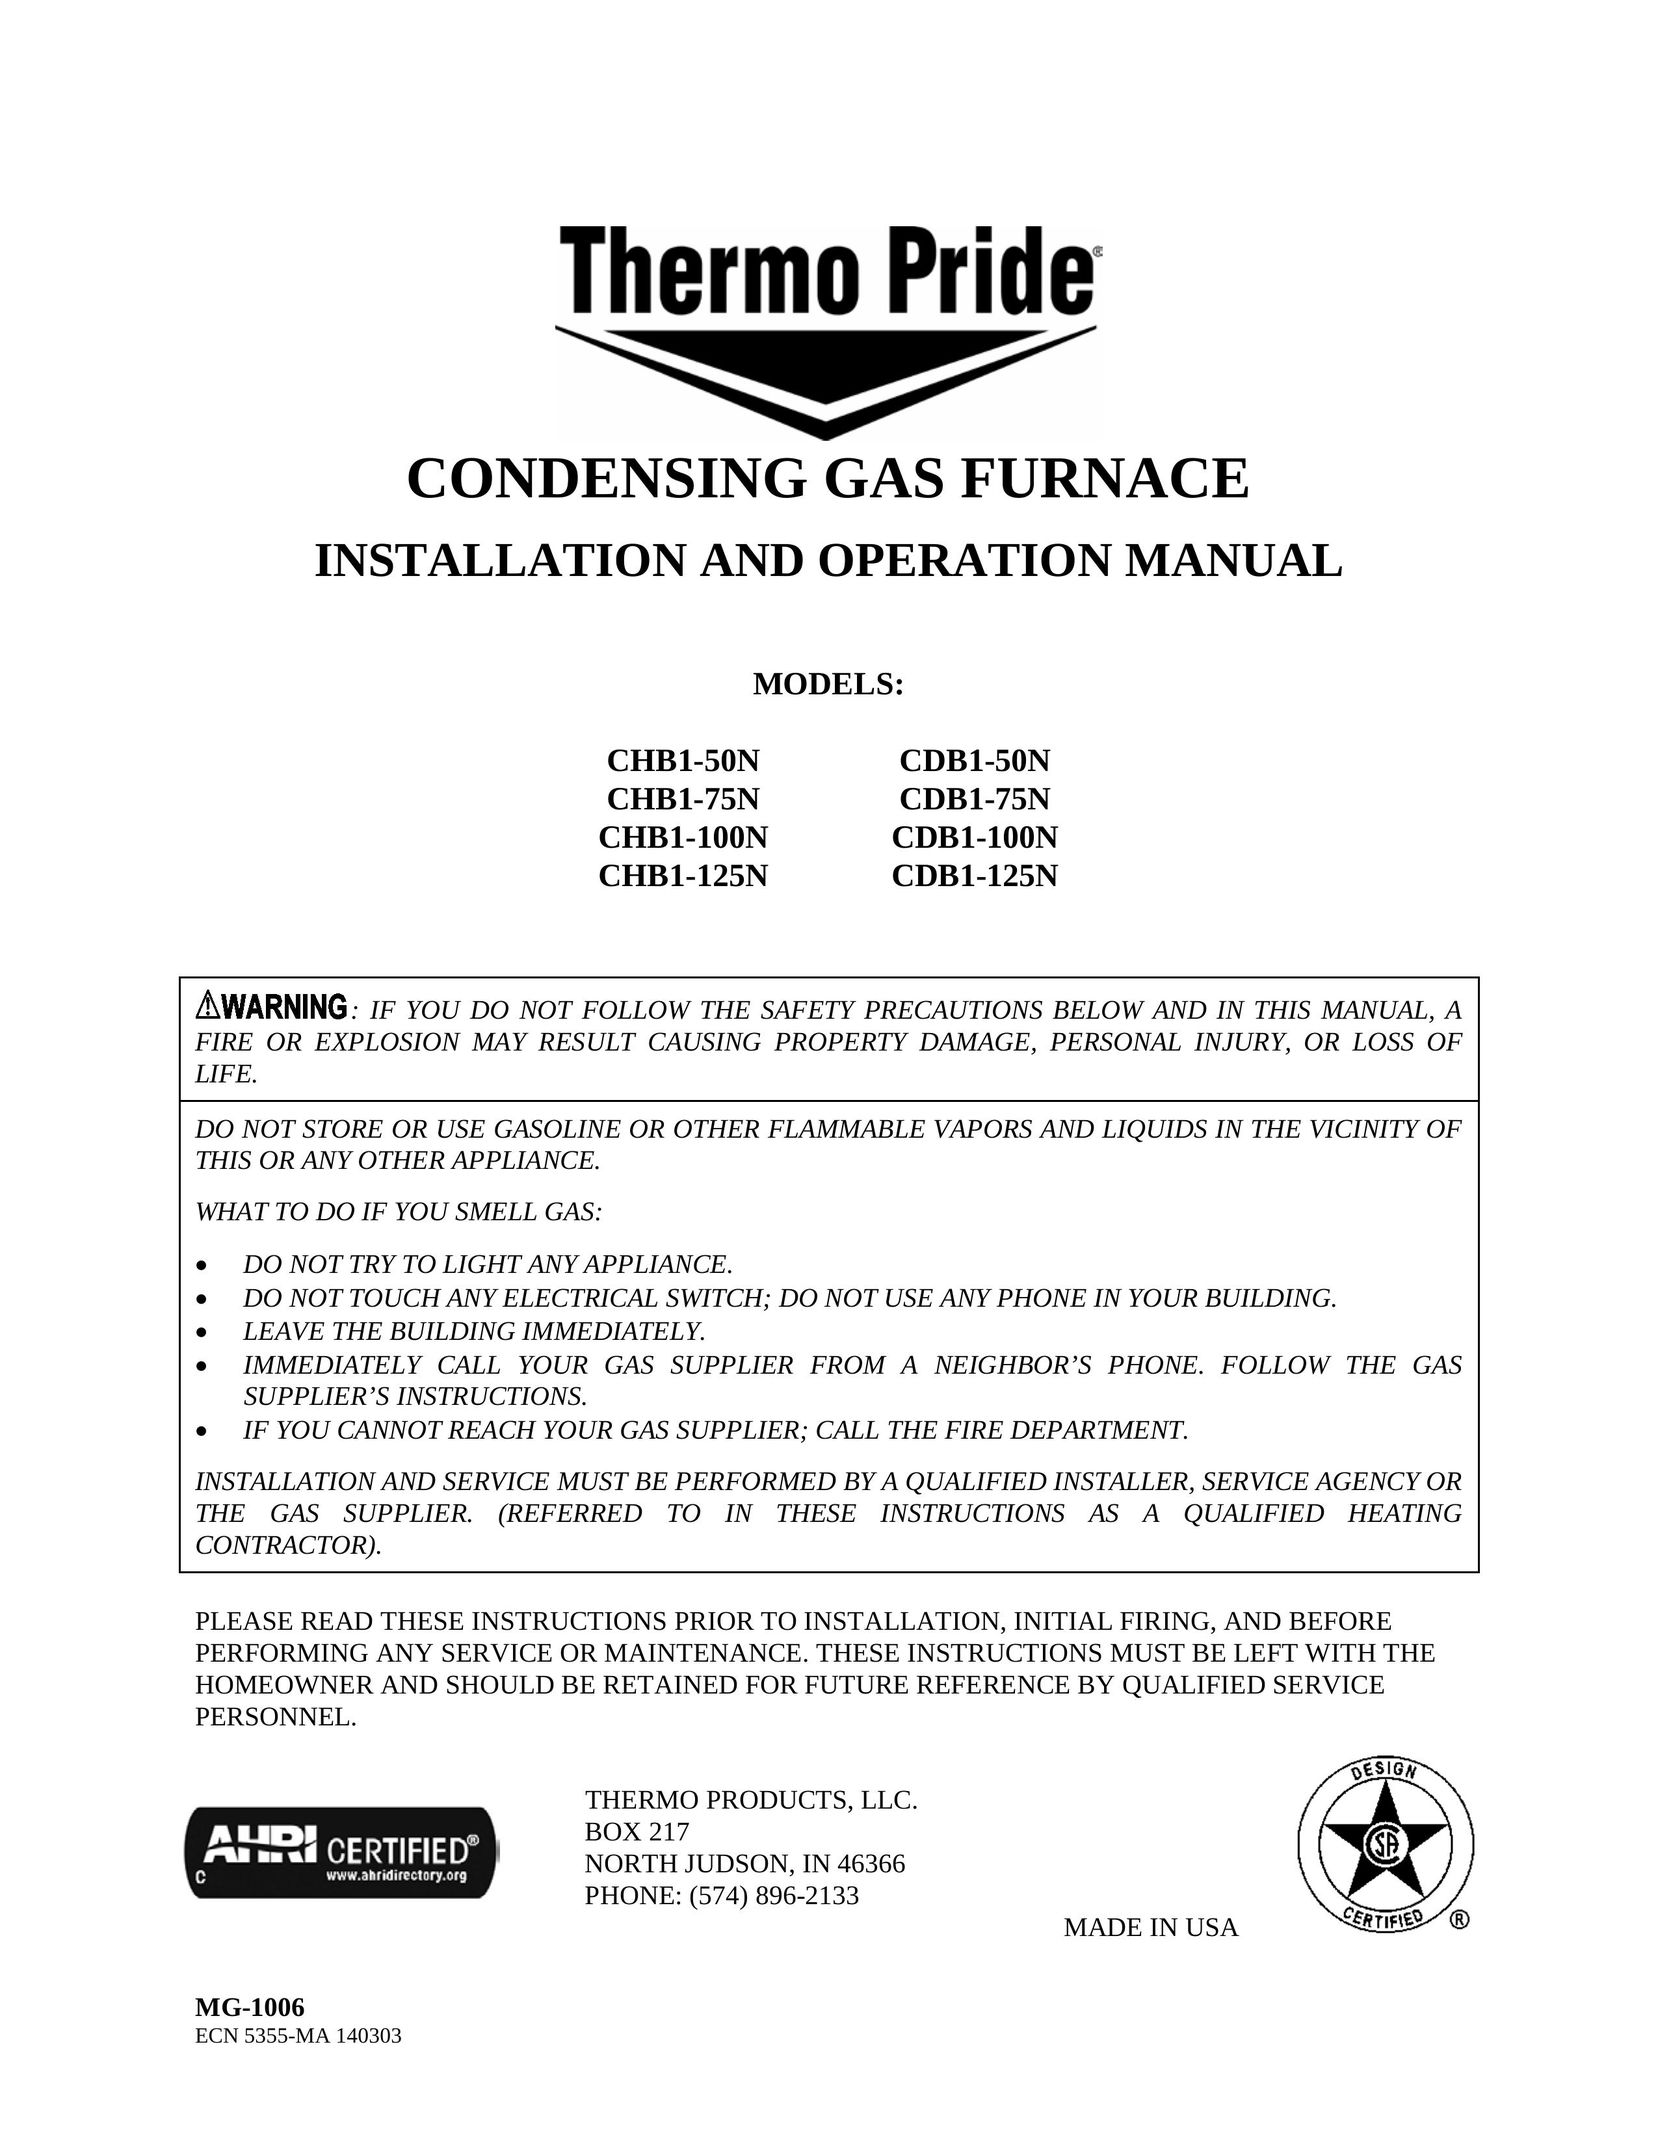 Thermo Products CBD1-125N Furnace User Manual